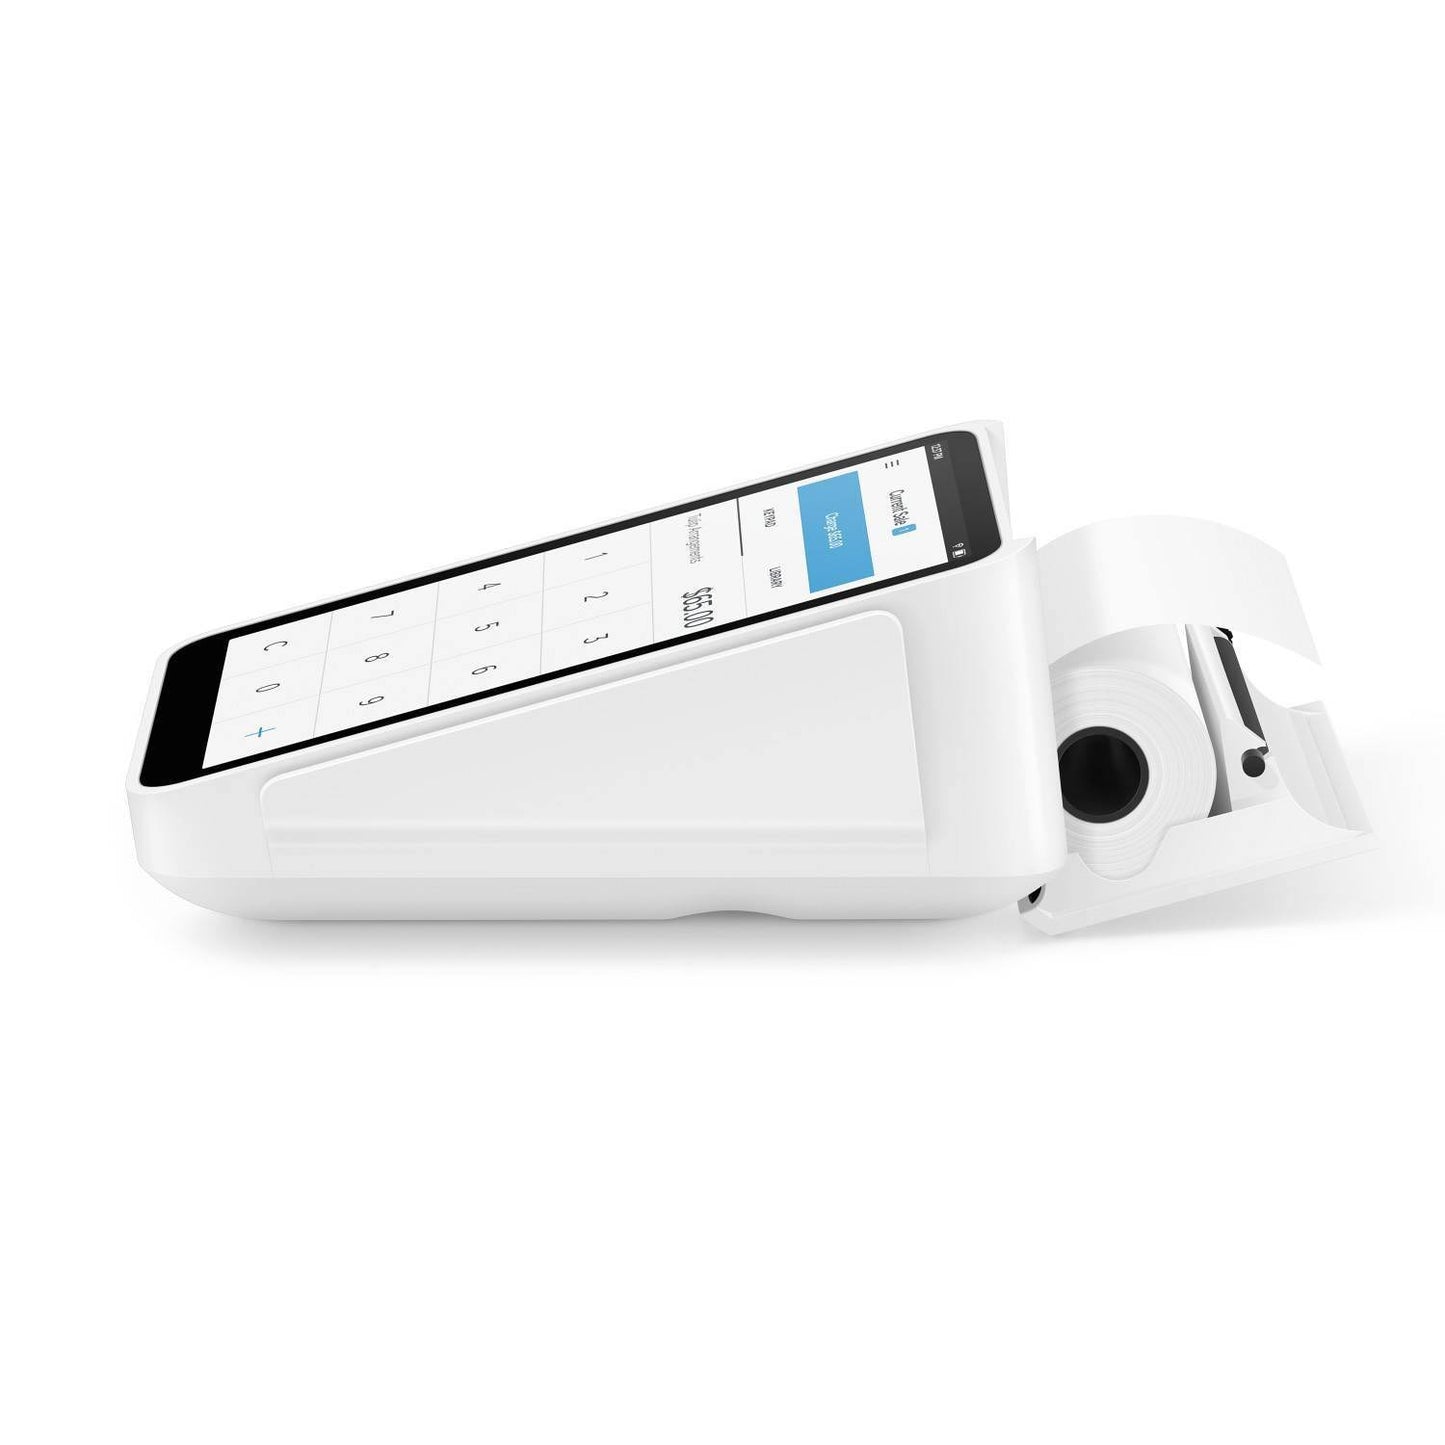 Square Terminal Credit Card Reader - White - Portable Payment Device, Contactless and Chip Reader, Built-In Receipt Printer, Mobile Payment Solution, Small Business